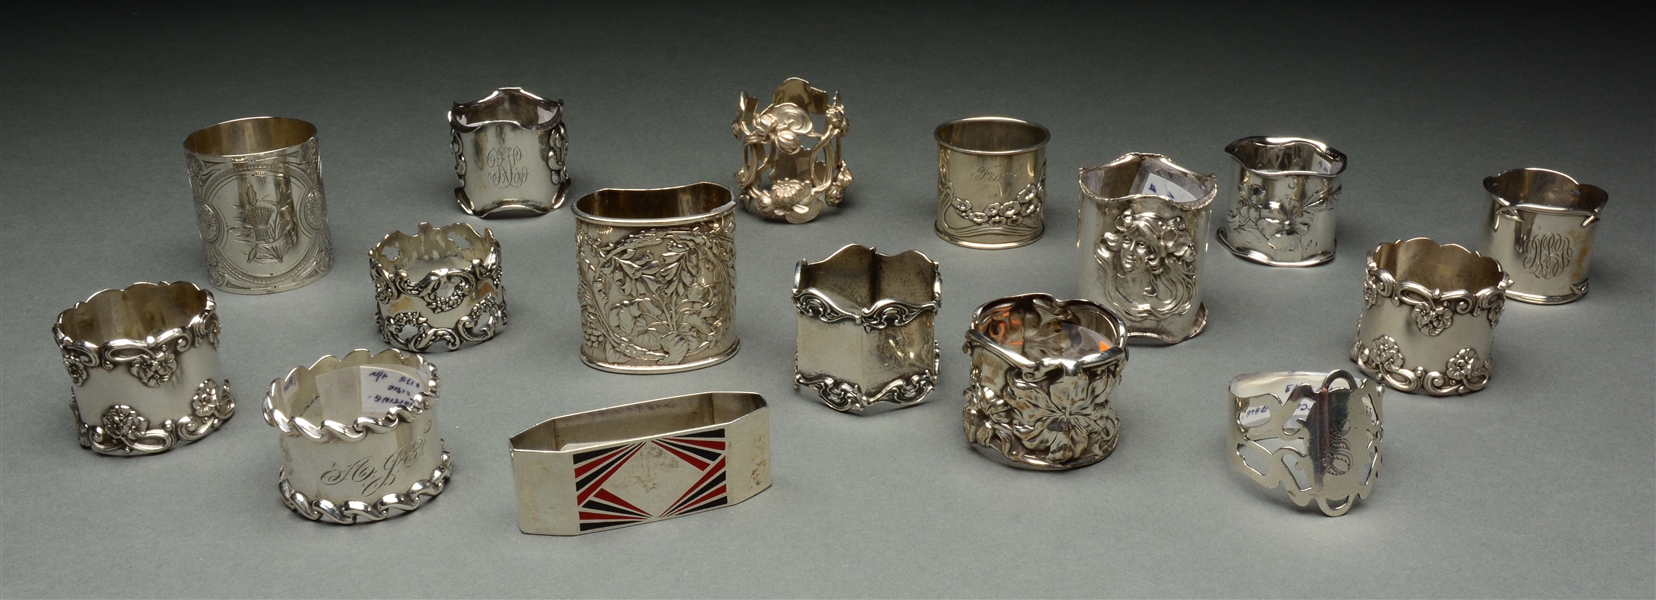 LOT OF 16: STERLING SILVER NAPKIN RINGS. 